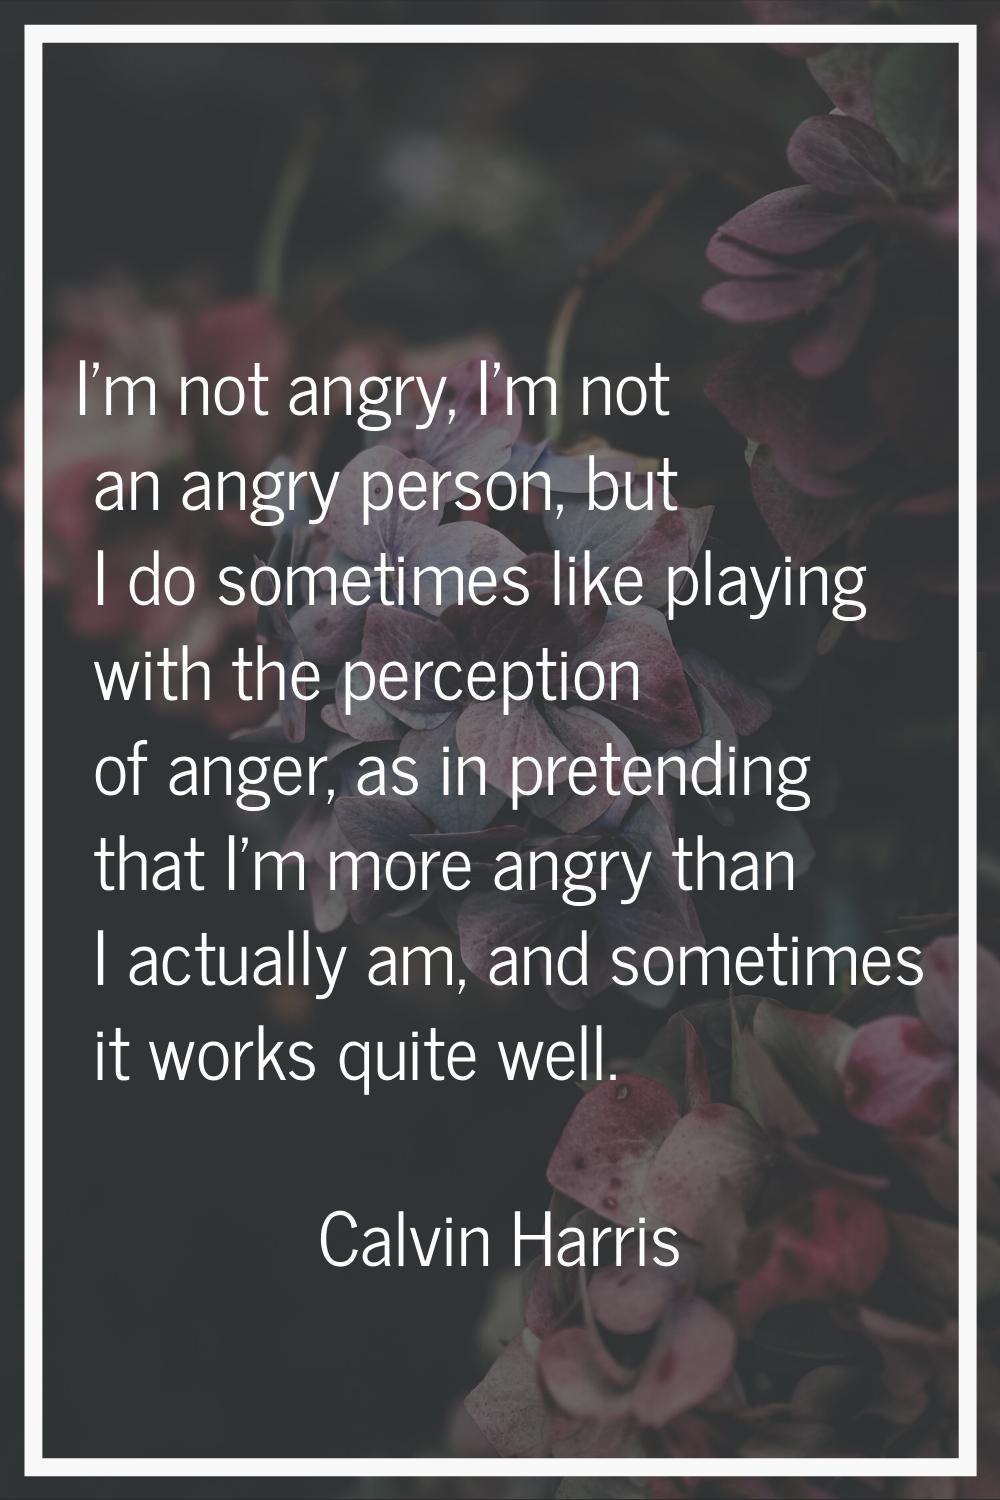 I'm not angry, I'm not an angry person, but I do sometimes like playing with the perception of ange